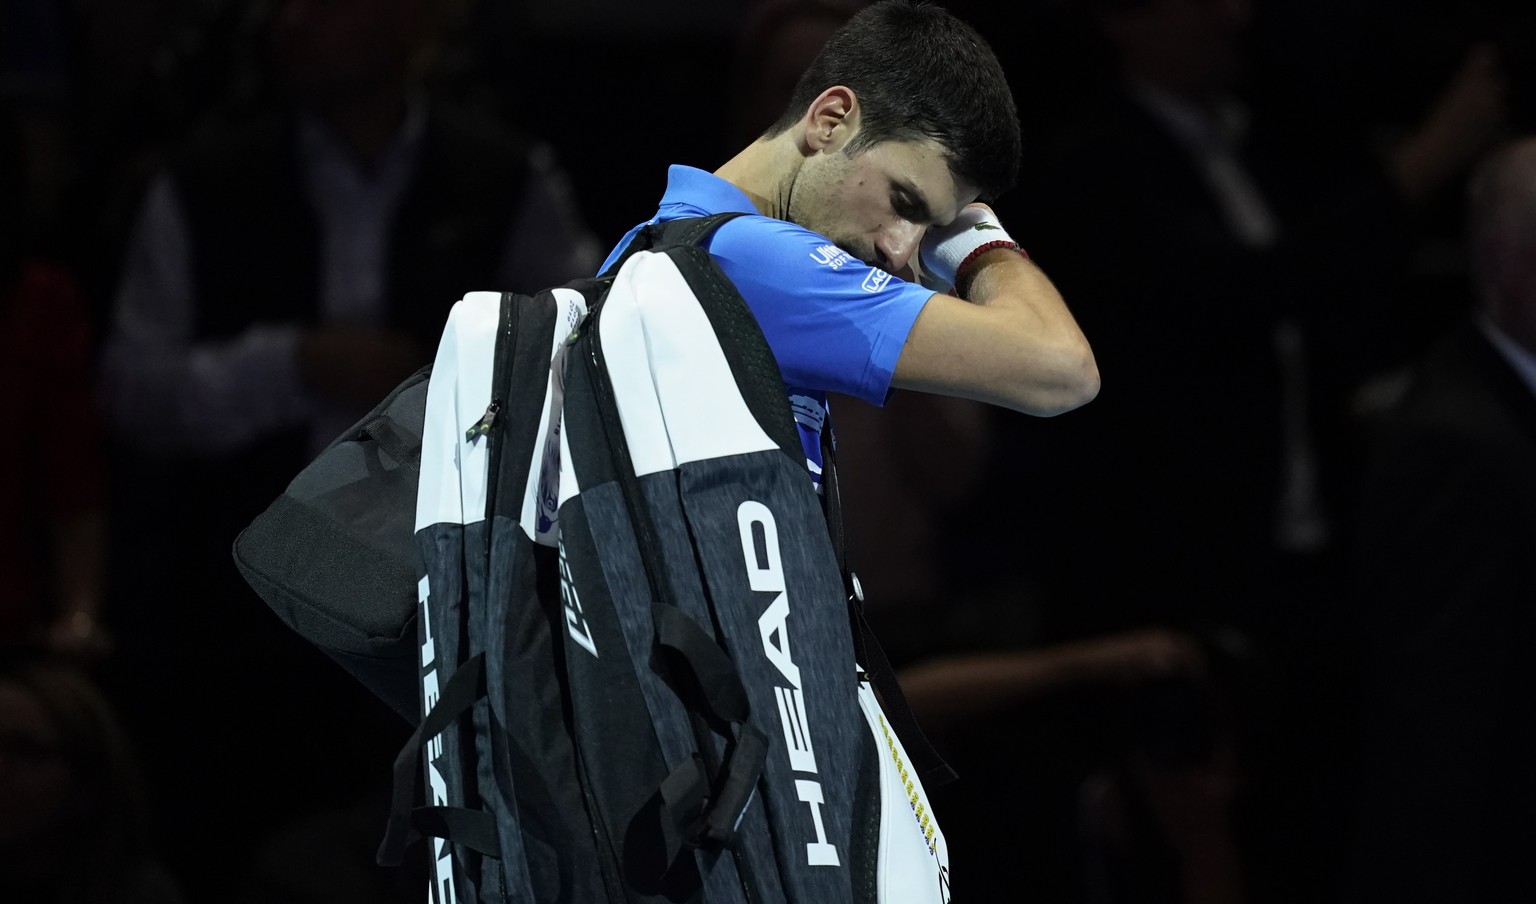 epa07997101 Novak Djokovic of Serbia reacts after losing his round robing match against Roger Federer of Switzerland at the ATP World Tour Finals tennis tournament in London, Britain, 14 November 2019 ...